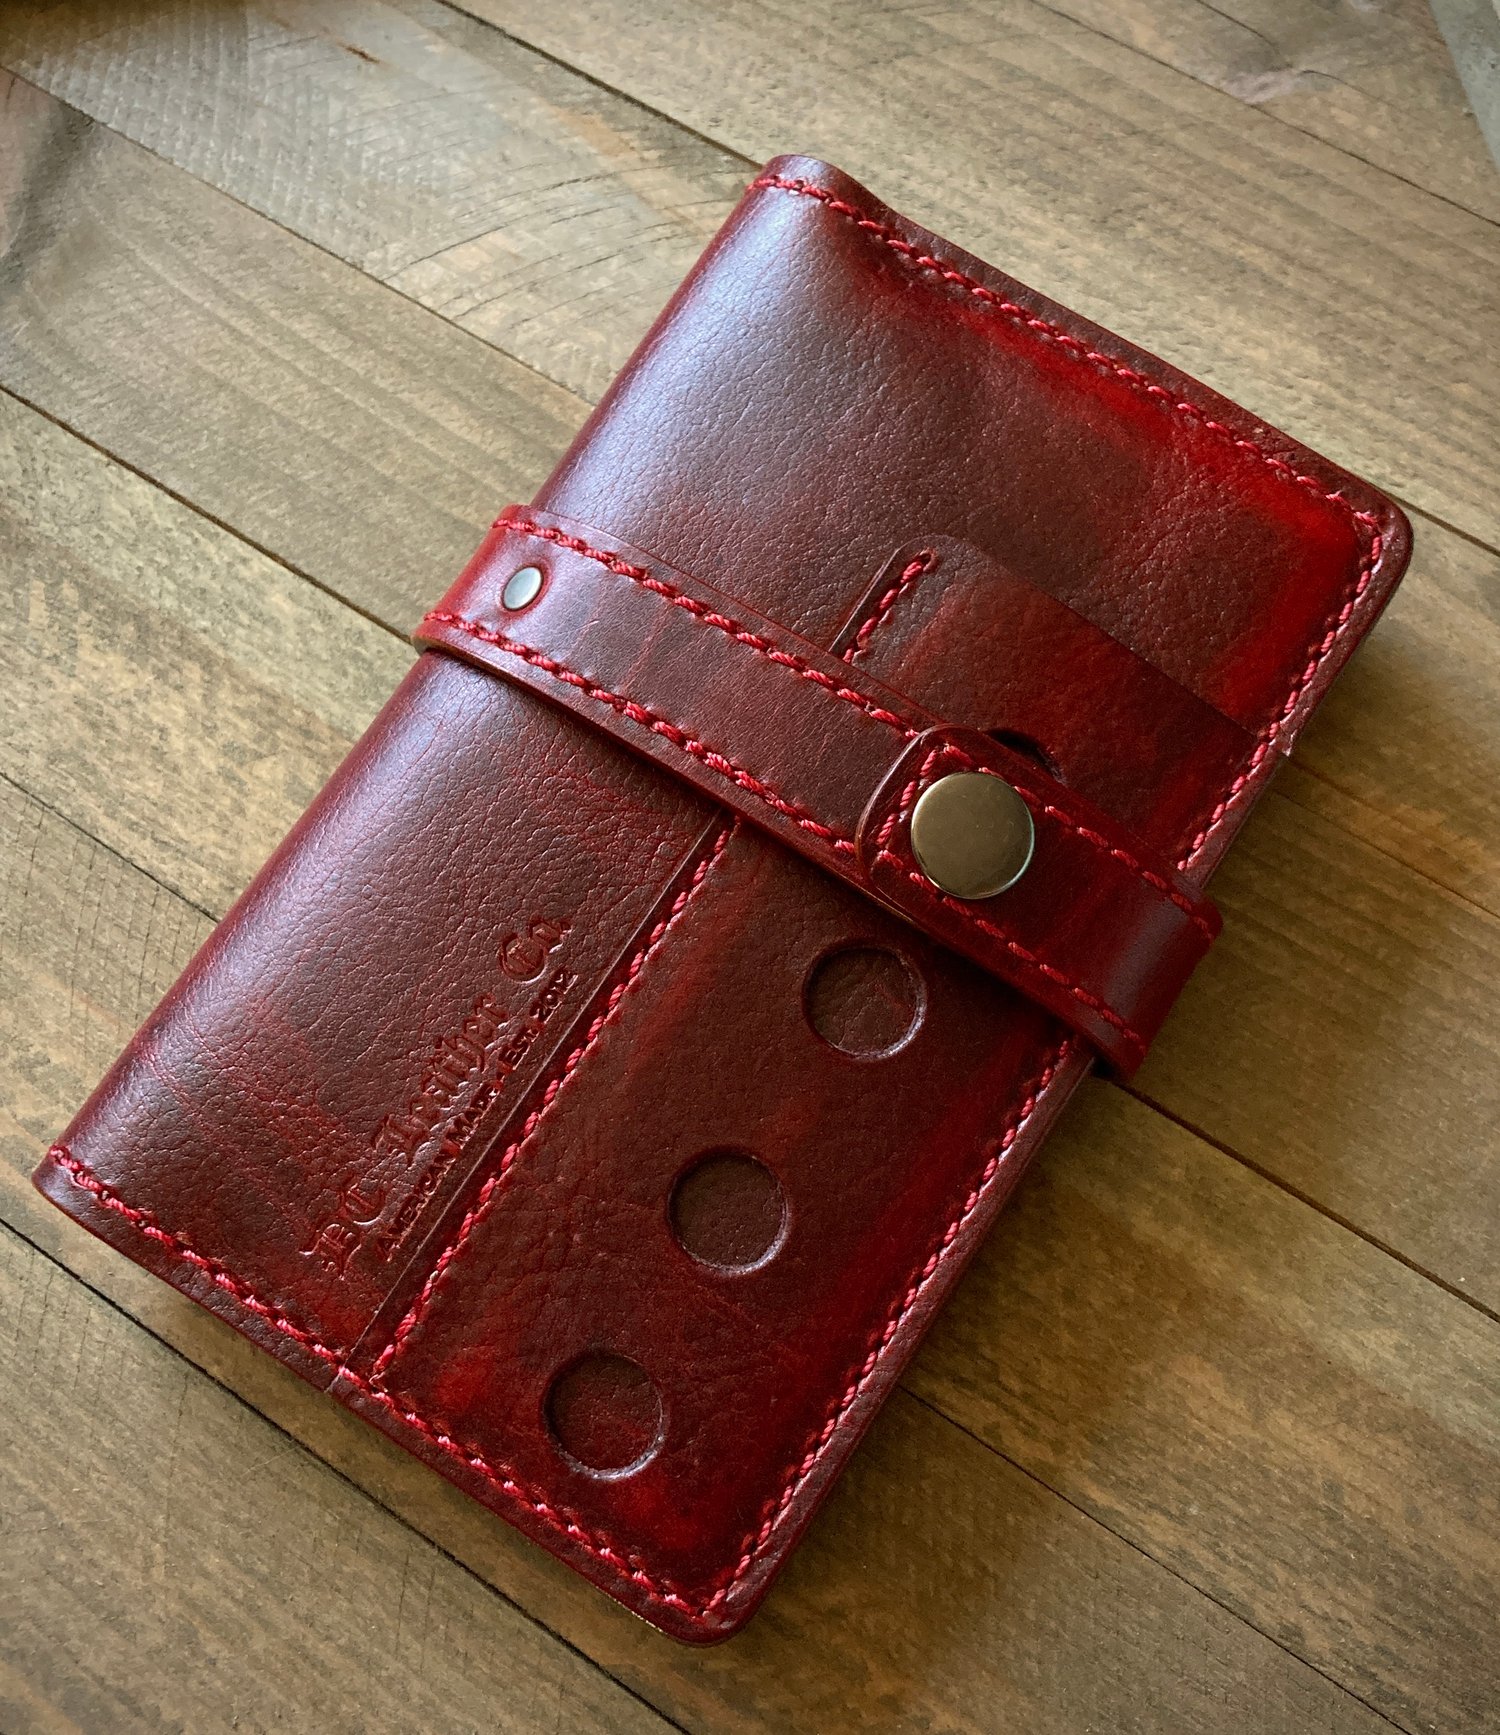 Image of Field Notes/Passport Cover - Drifter Style, Ruby/wine color